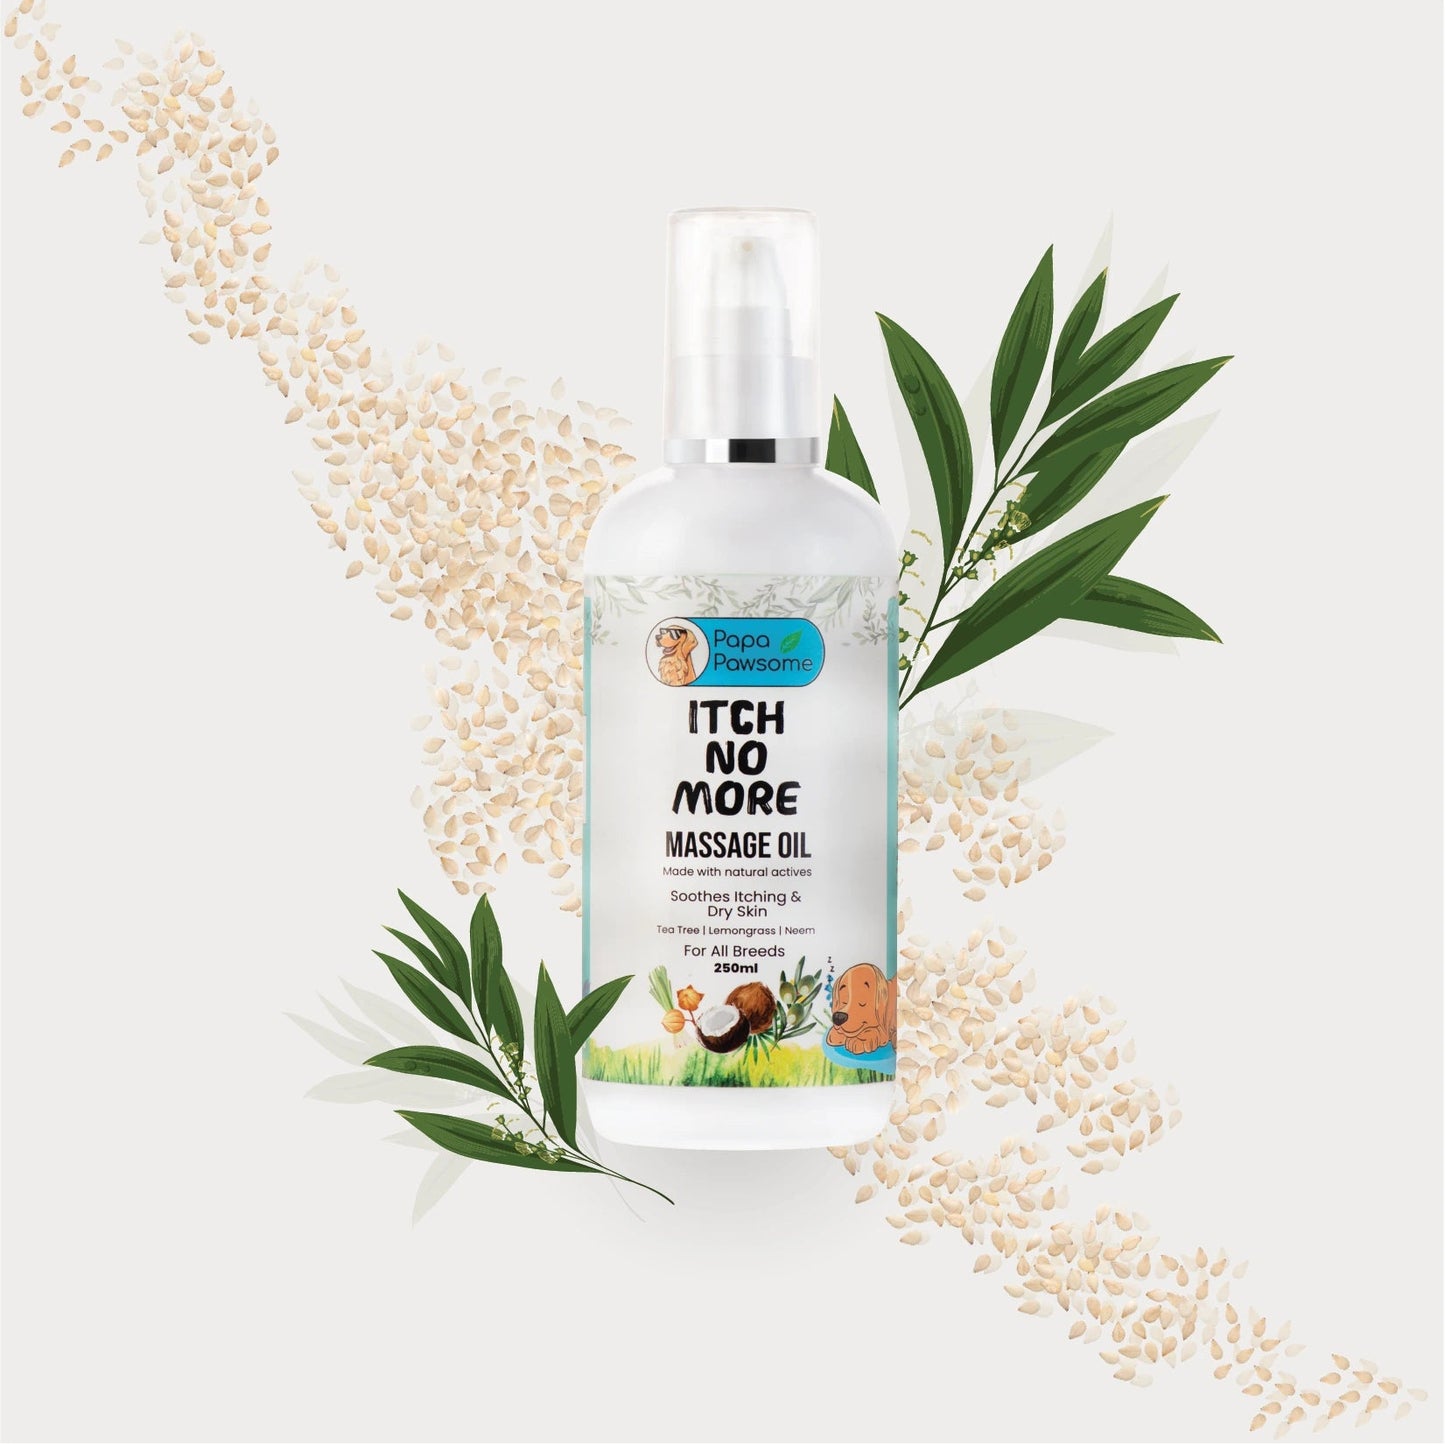 Pet oil bottle showcasing all ingredients: Flaxseed Oil, Neem Supercritical Extracts, Olive Oil, Sesame Oil, Castor Oil, Coconut Oil, Tea Tree Essential Oil, and Lemongrass Essential Oil